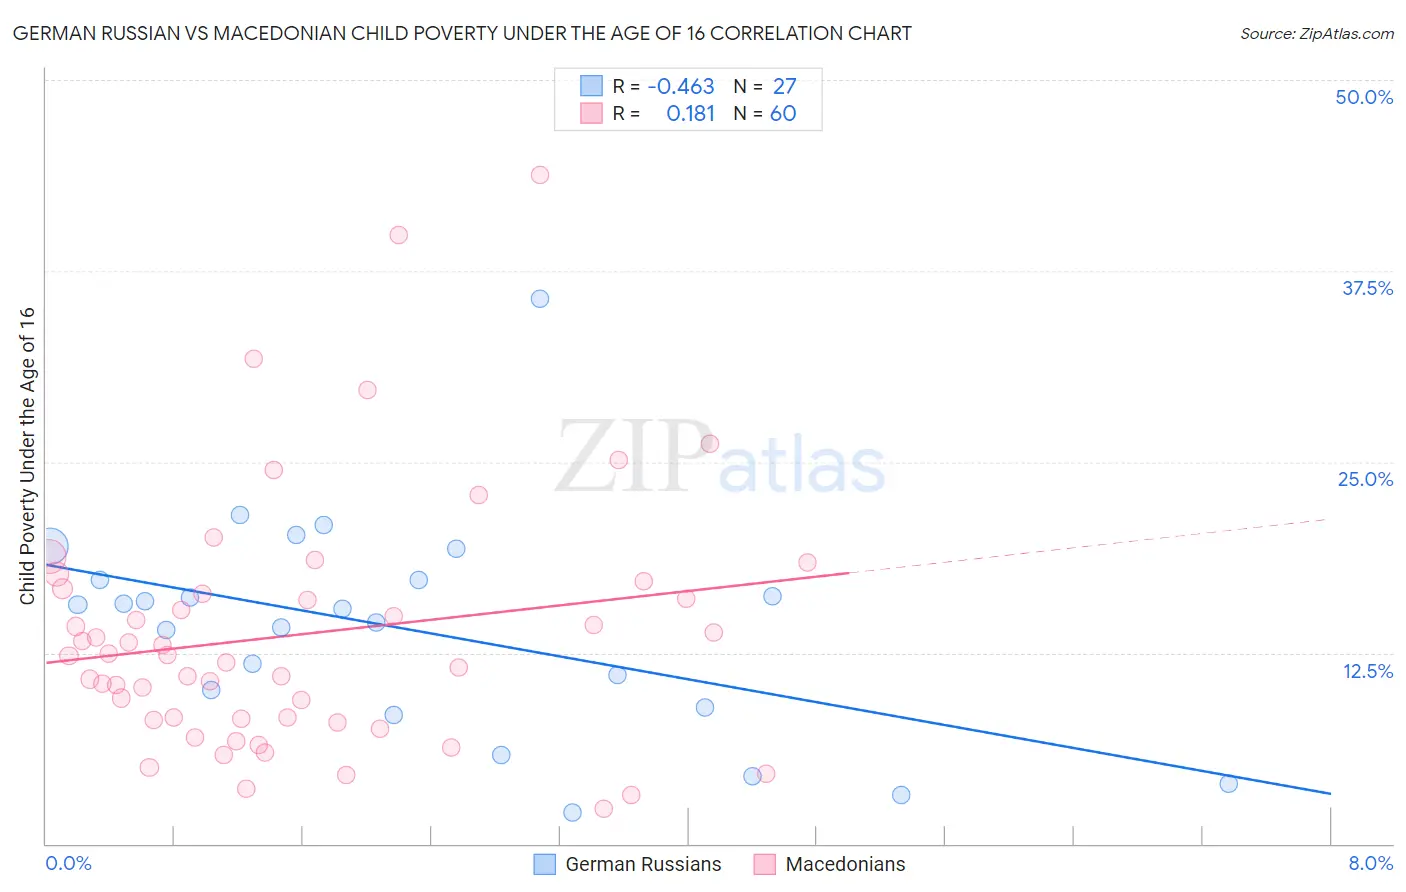 German Russian vs Macedonian Child Poverty Under the Age of 16